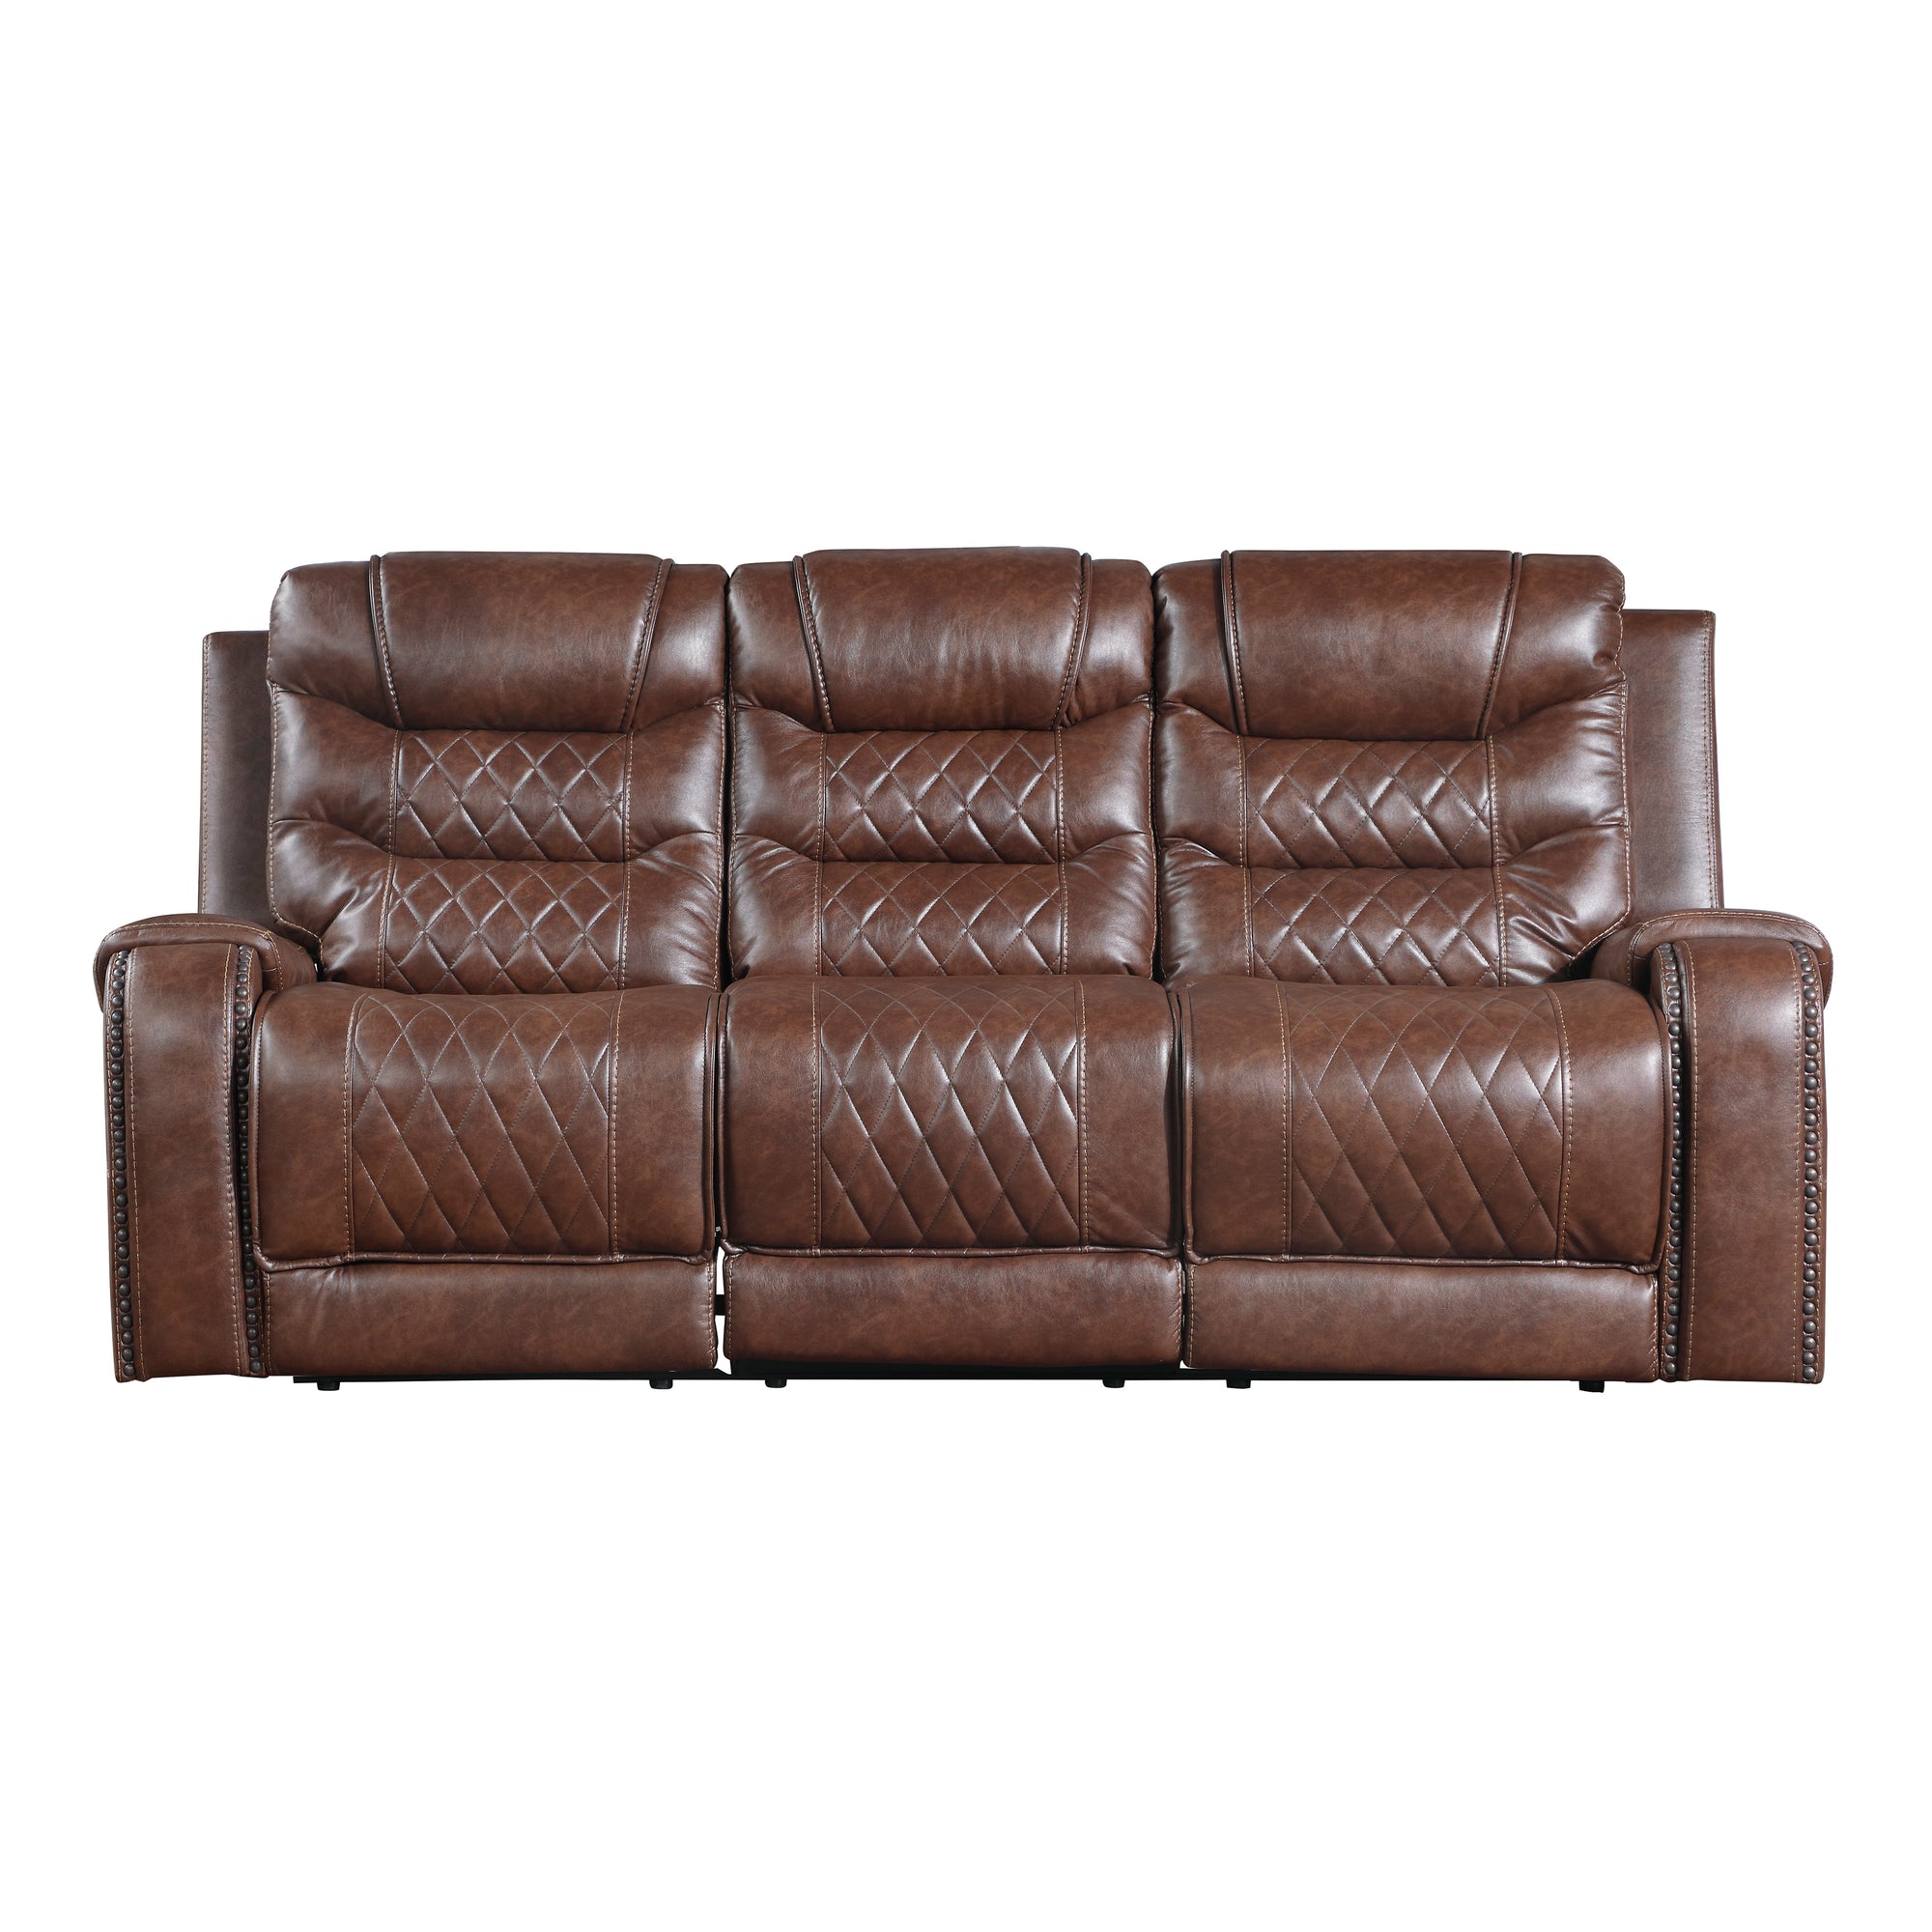 Lenci Double Reclining Sofa with Drop-Down Cup Holders, Receptacles and USB ports